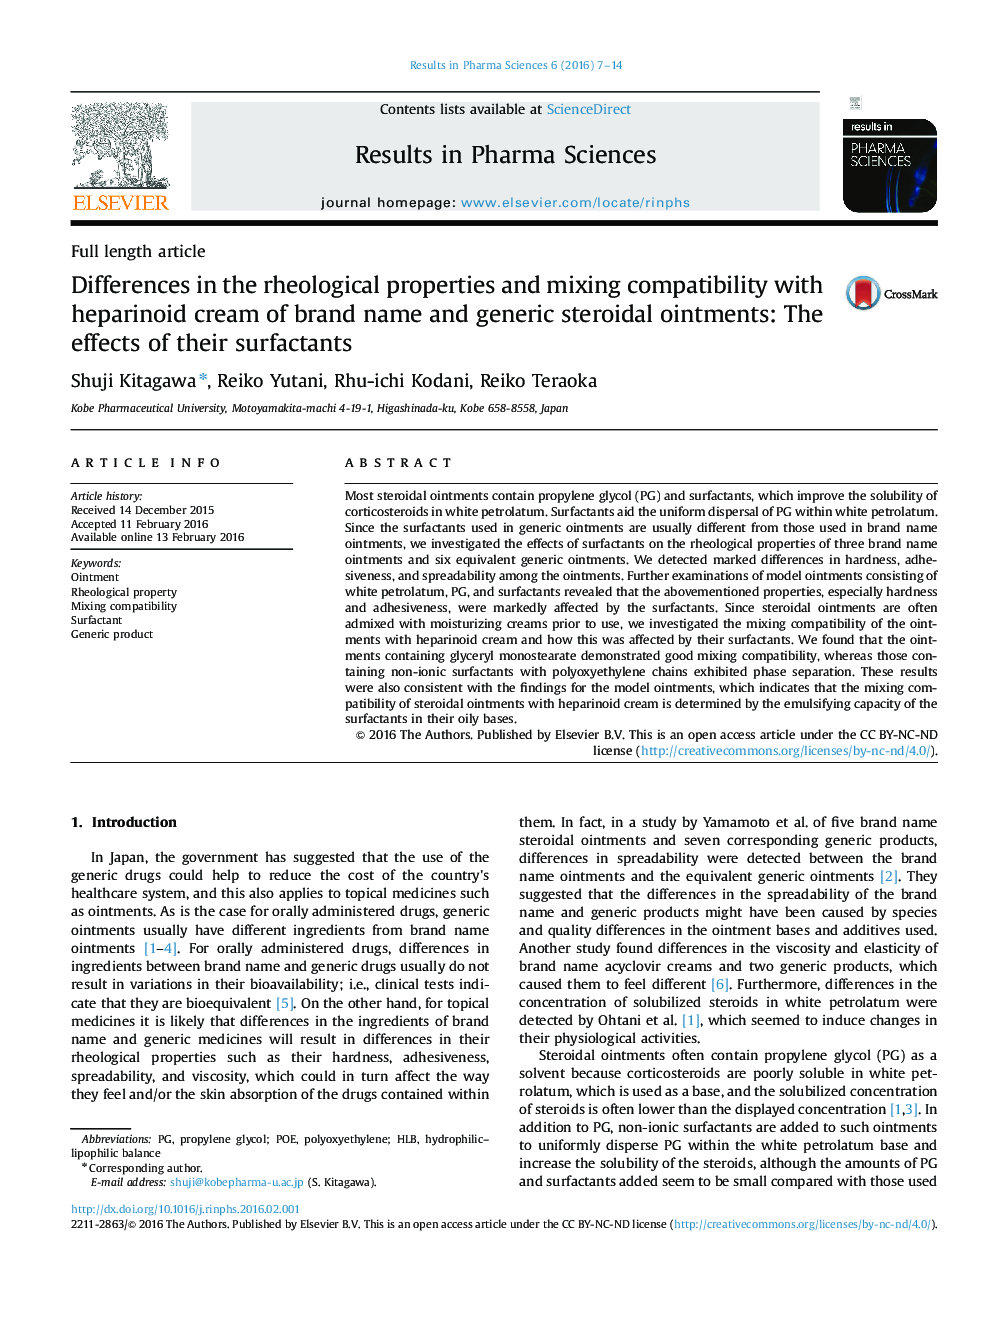 Differences in the rheological properties and mixing compatibility with heparinoid cream of brand name and generic steroidal ointments: The effects of their surfactants